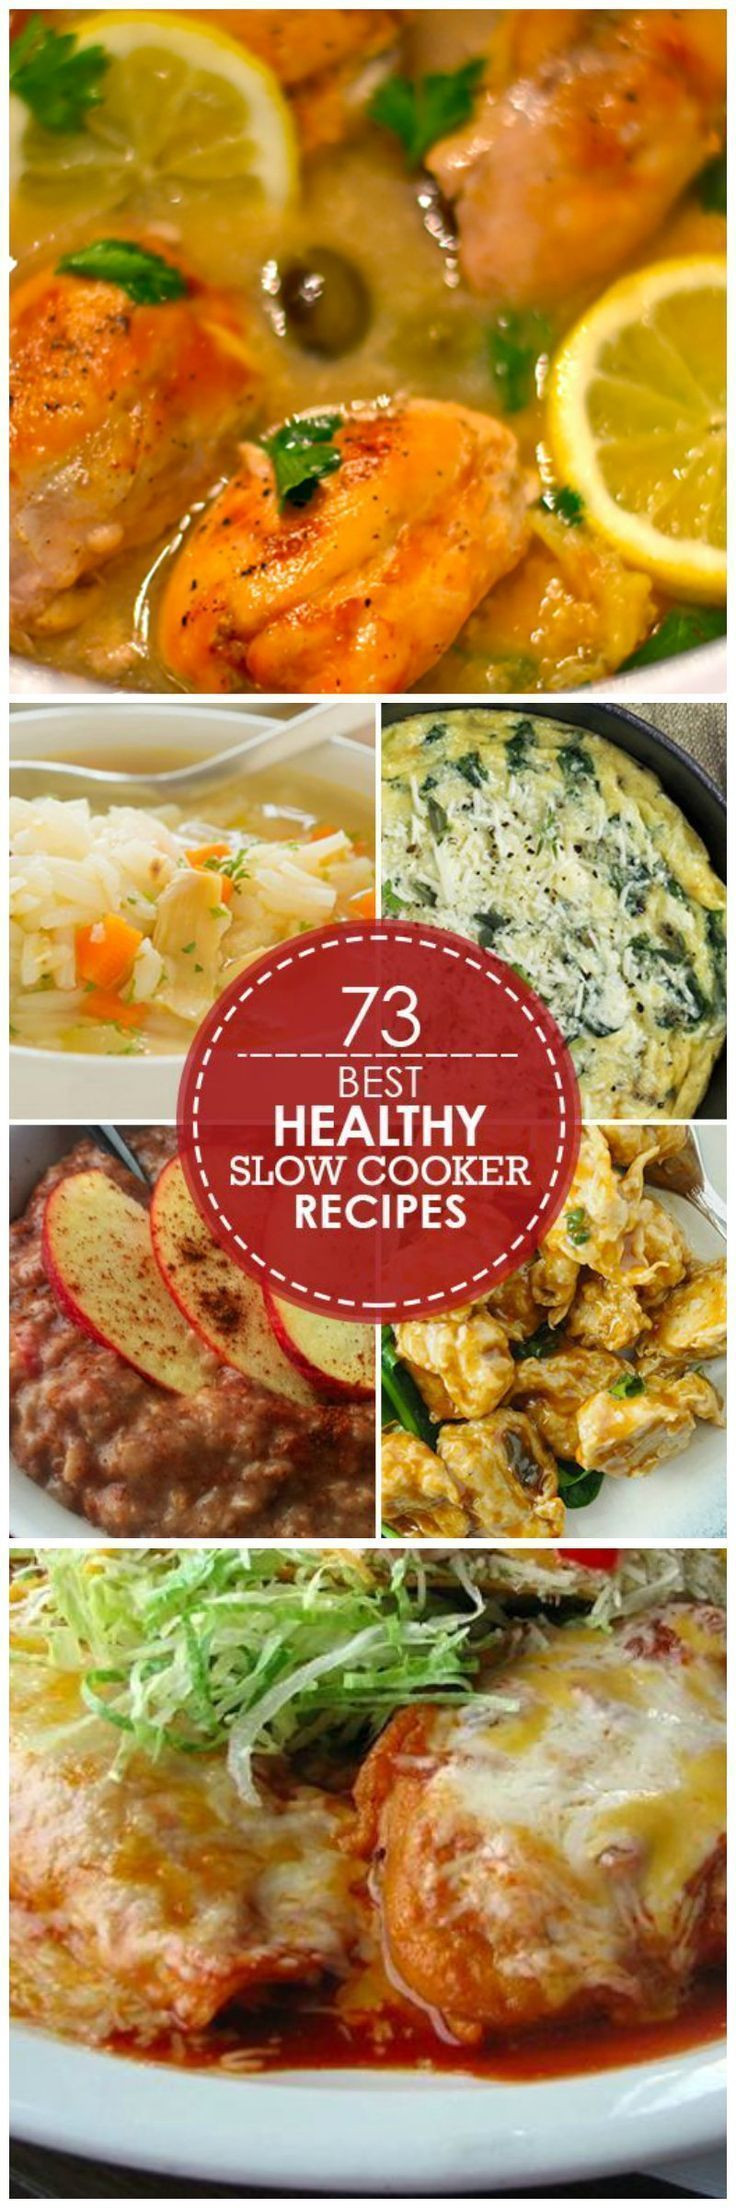 Slow Cooker Recipes Healthy
 1000 images about Skinny Slow Cooker on Pinterest